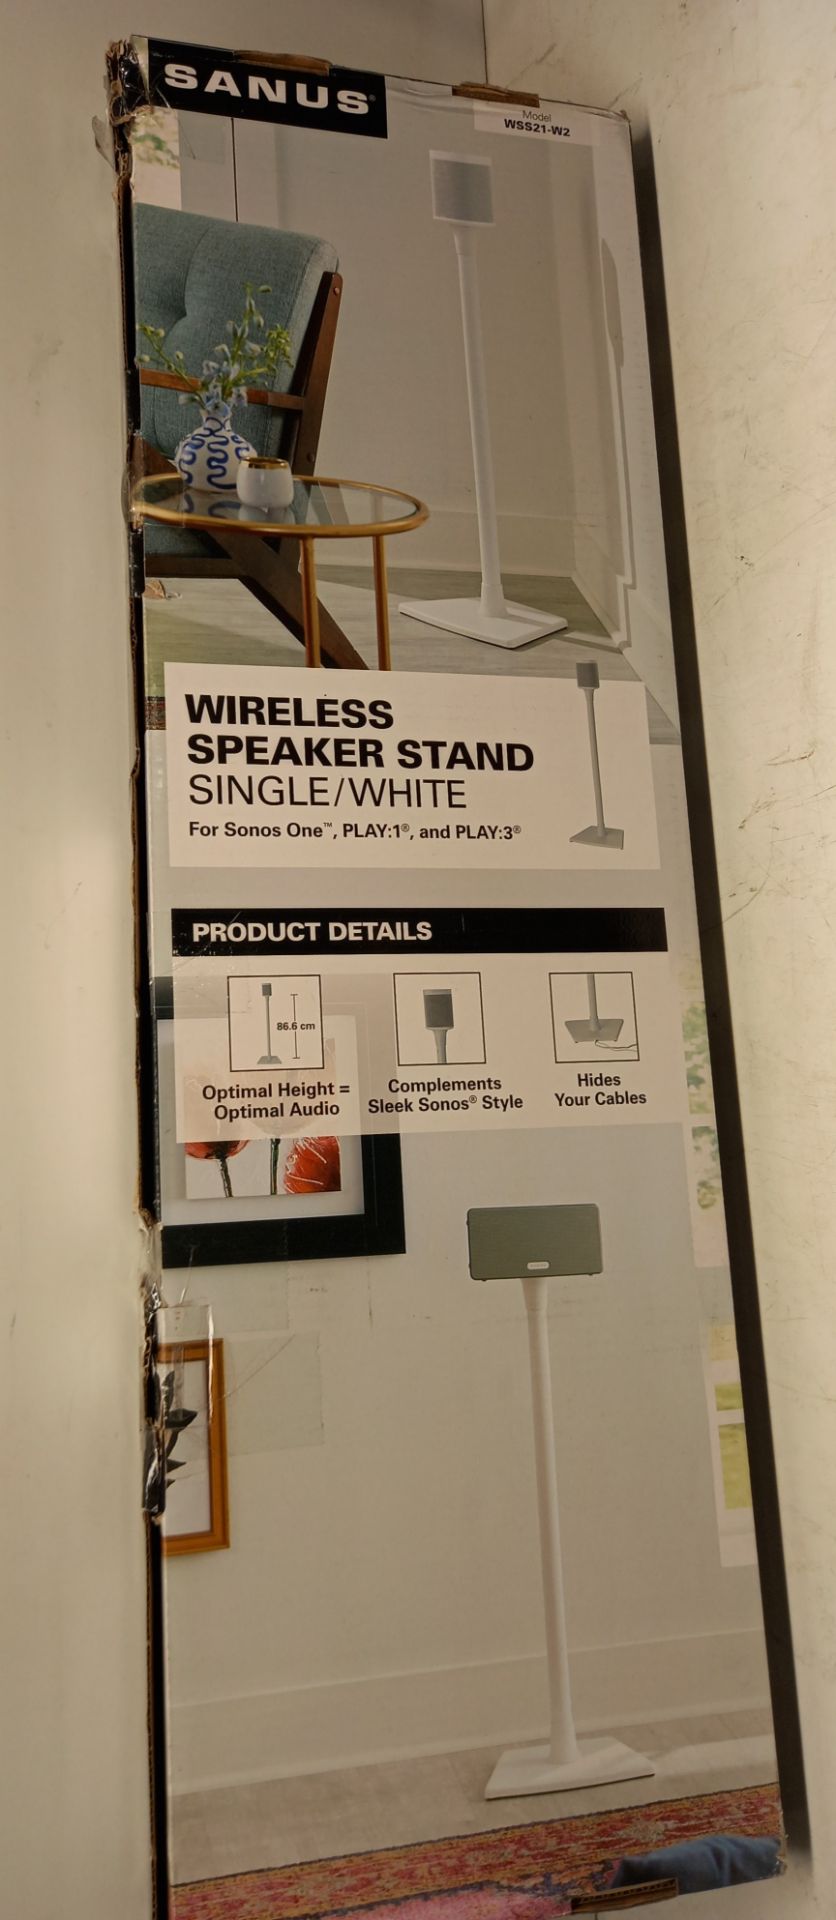 2 x Wireless Speaker Stands For Sonos - Image 4 of 4